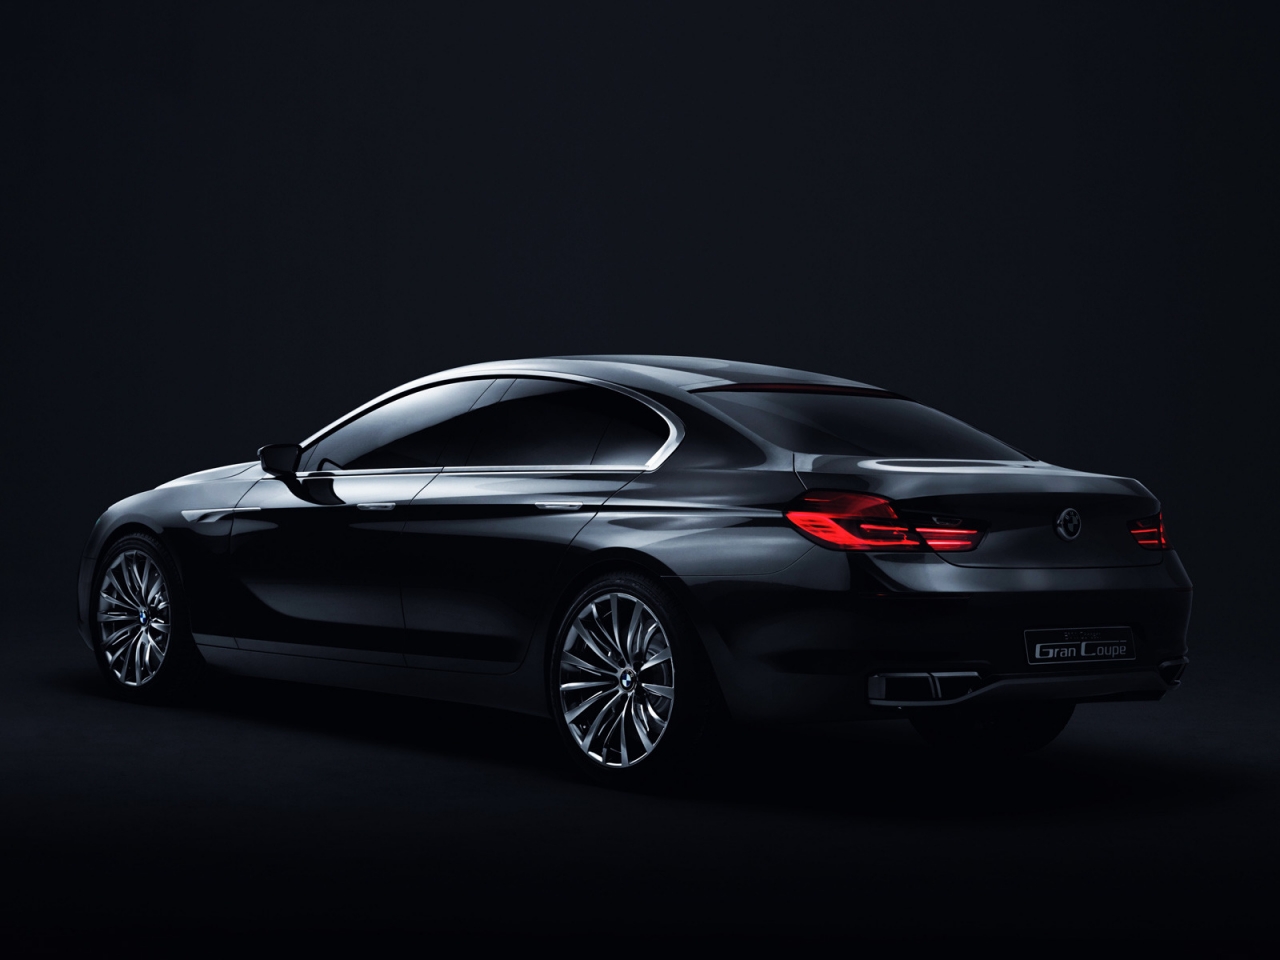 BMW Gran Coupe Rear for 1280 x 960 resolution